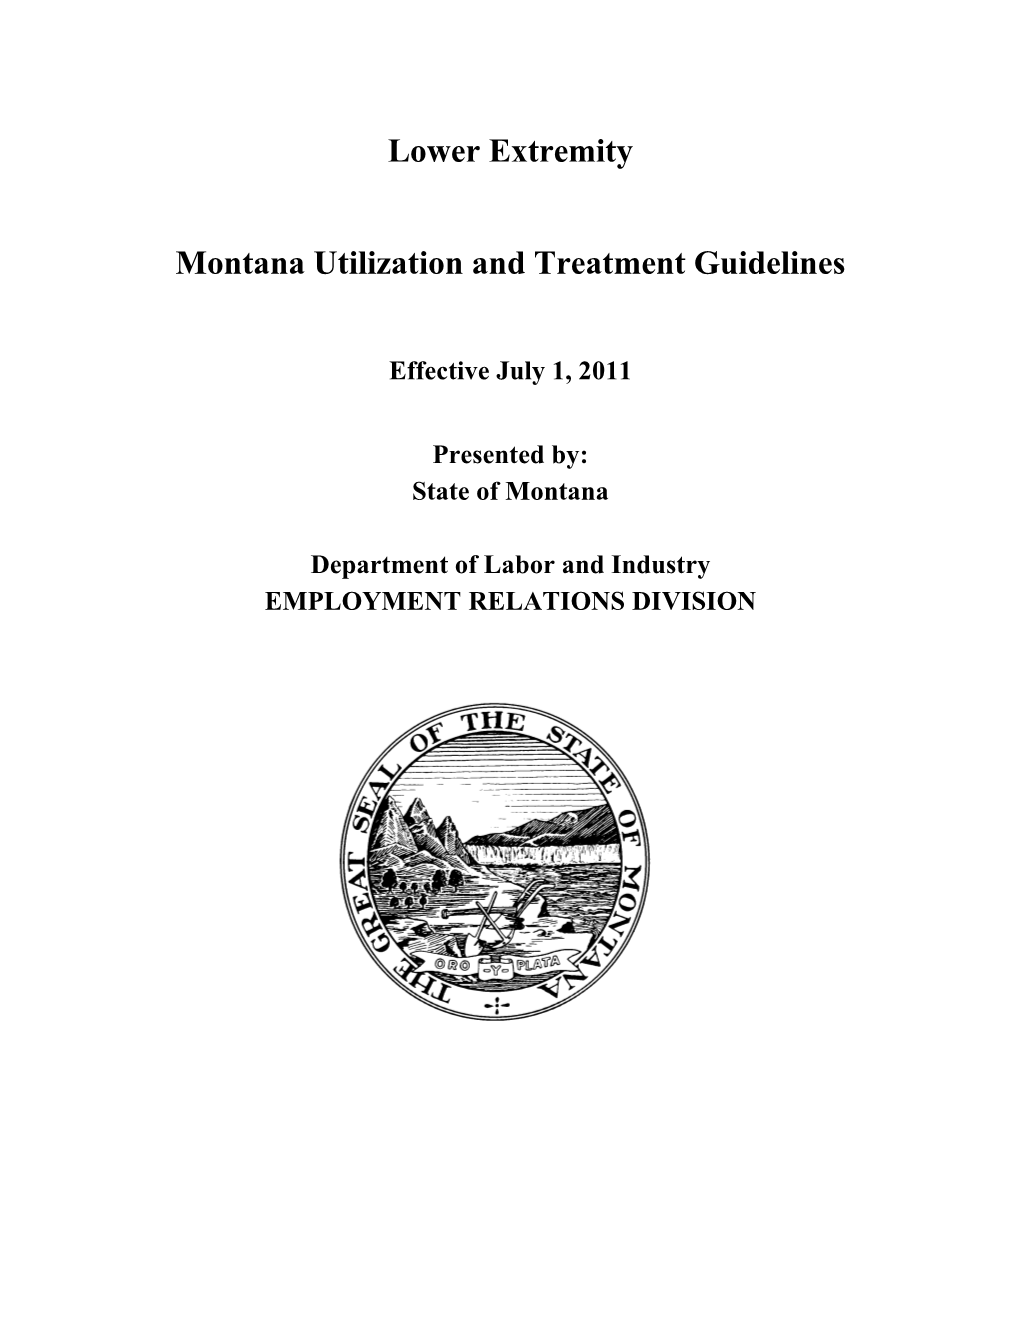 Lower Extremity Montana Utilization and Treatment Guidelines